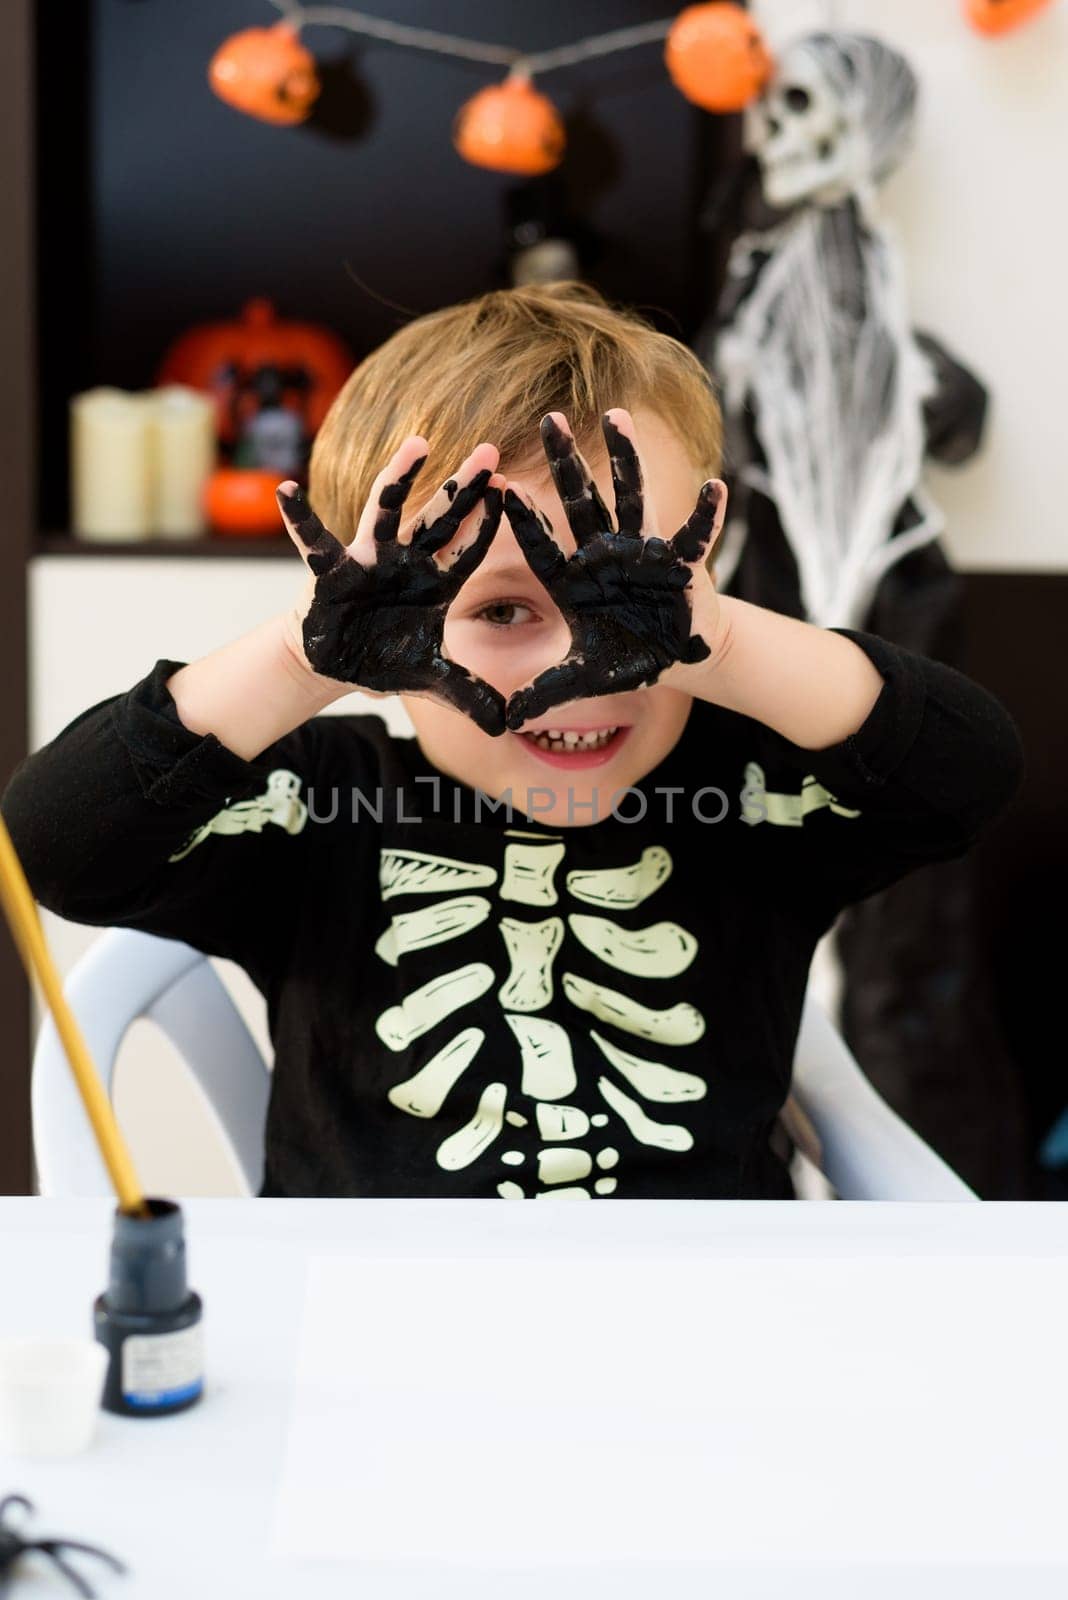 A child dressed as a skeleton shows spider and ghost crafts. Halloween party by jcdiazhidalgo